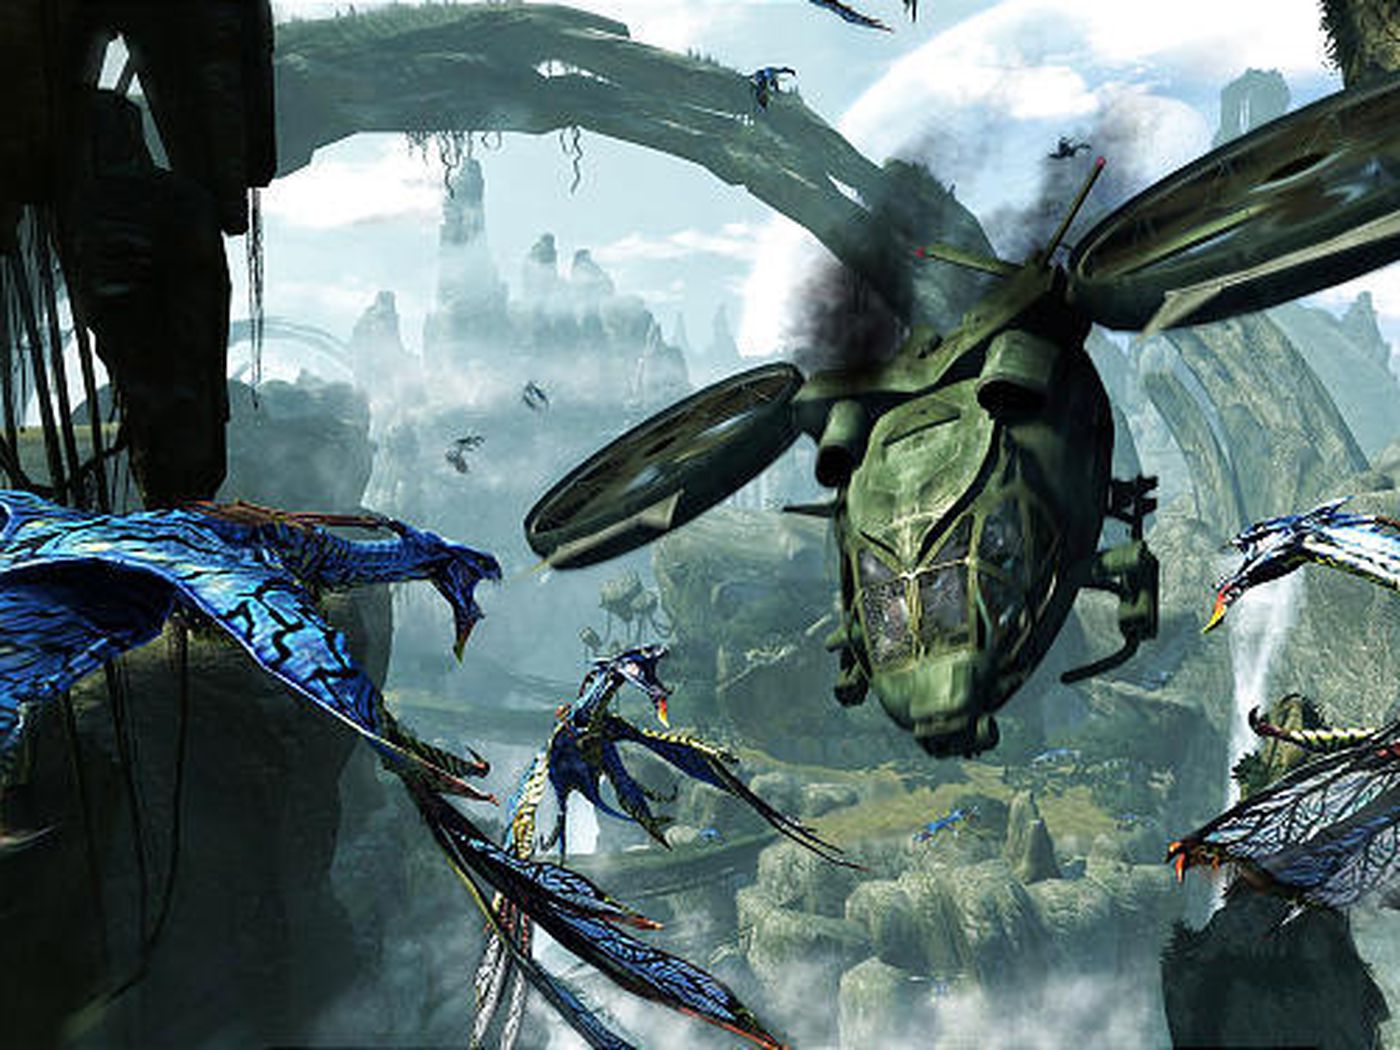 Review: 'Avatar' game a stunning, average shooter